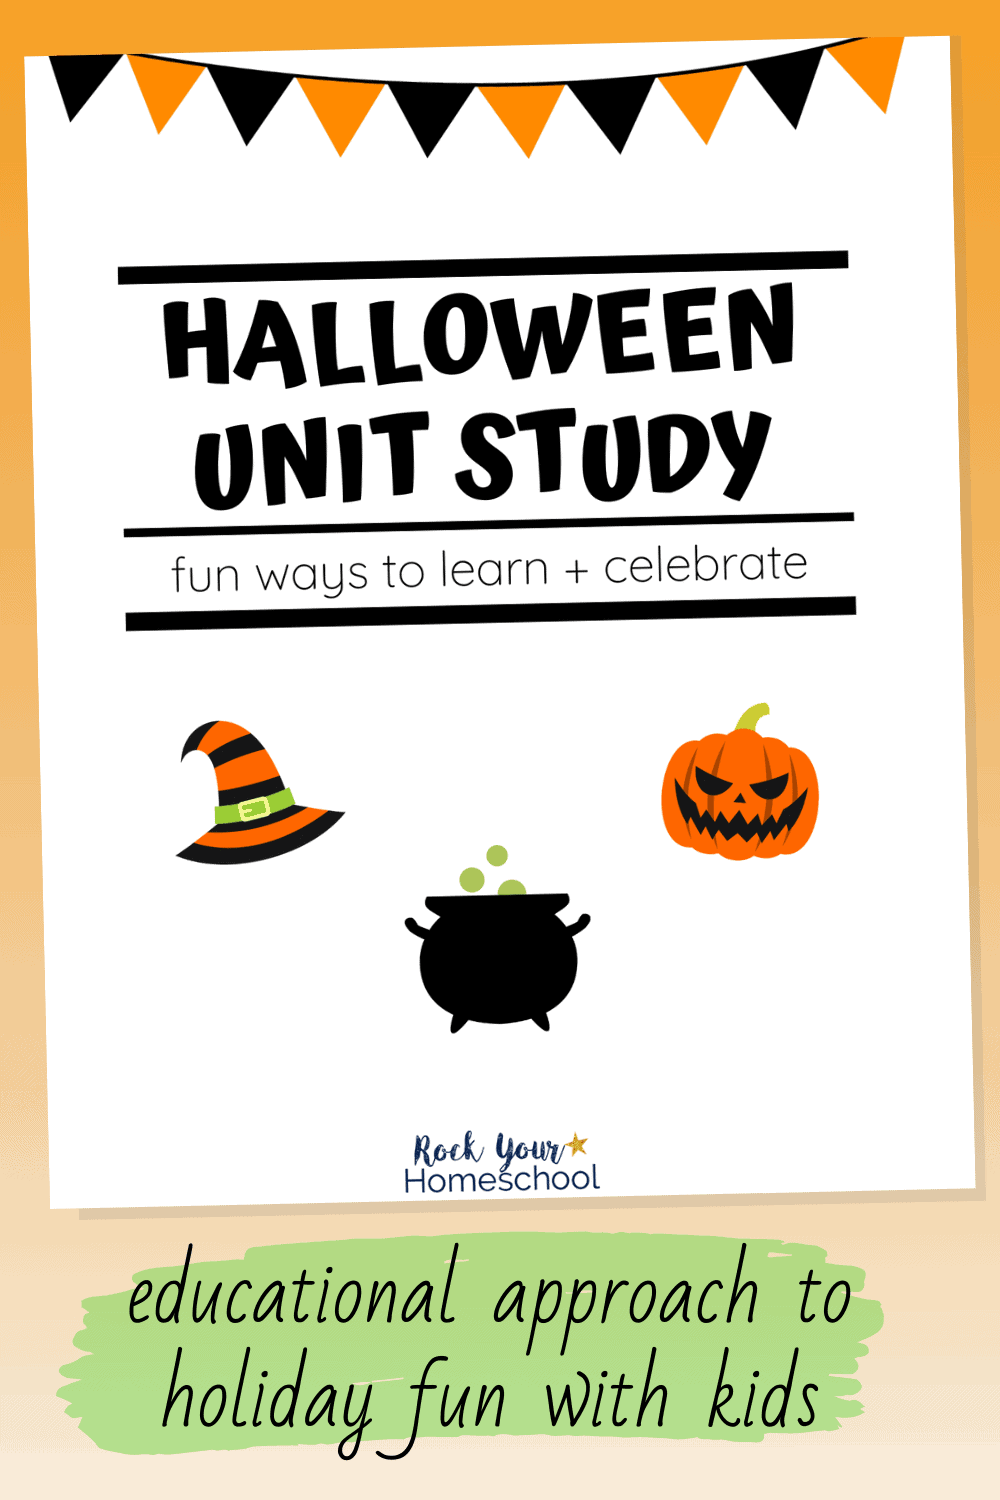 Exciting Halloween Unit Study with Fun Activities & More!